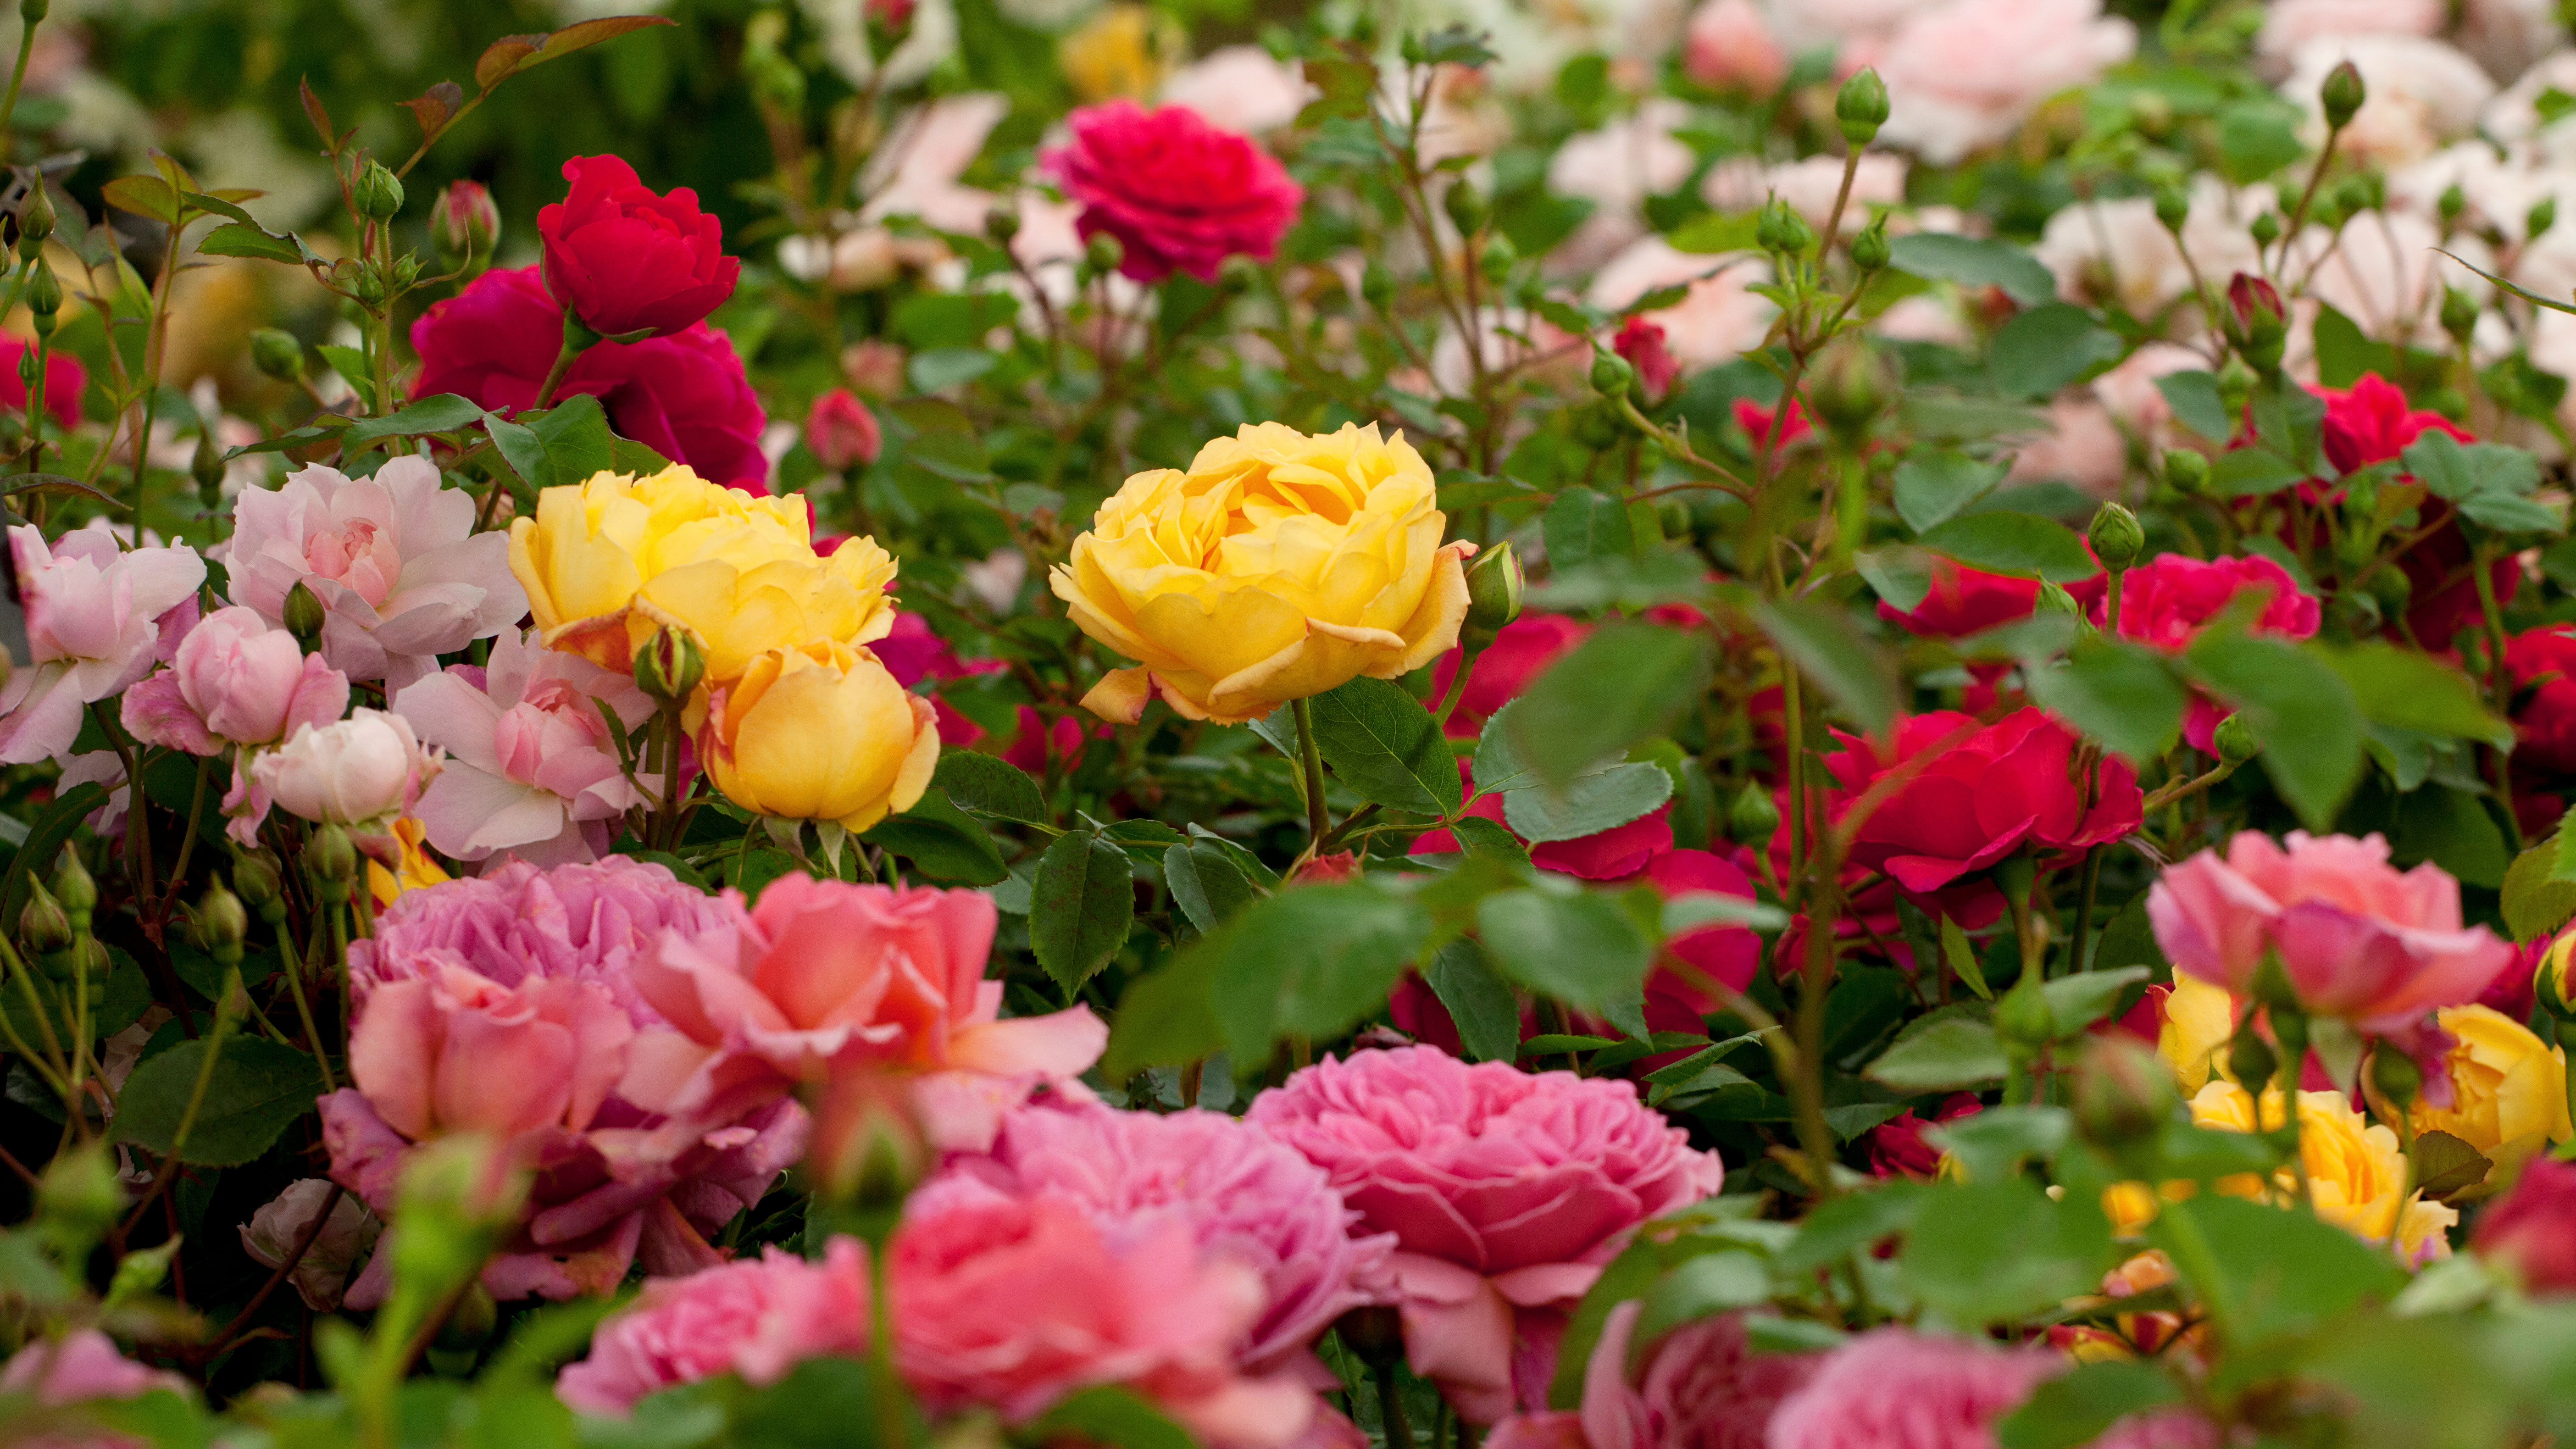 How To Plant A Rose Bush For Beginners